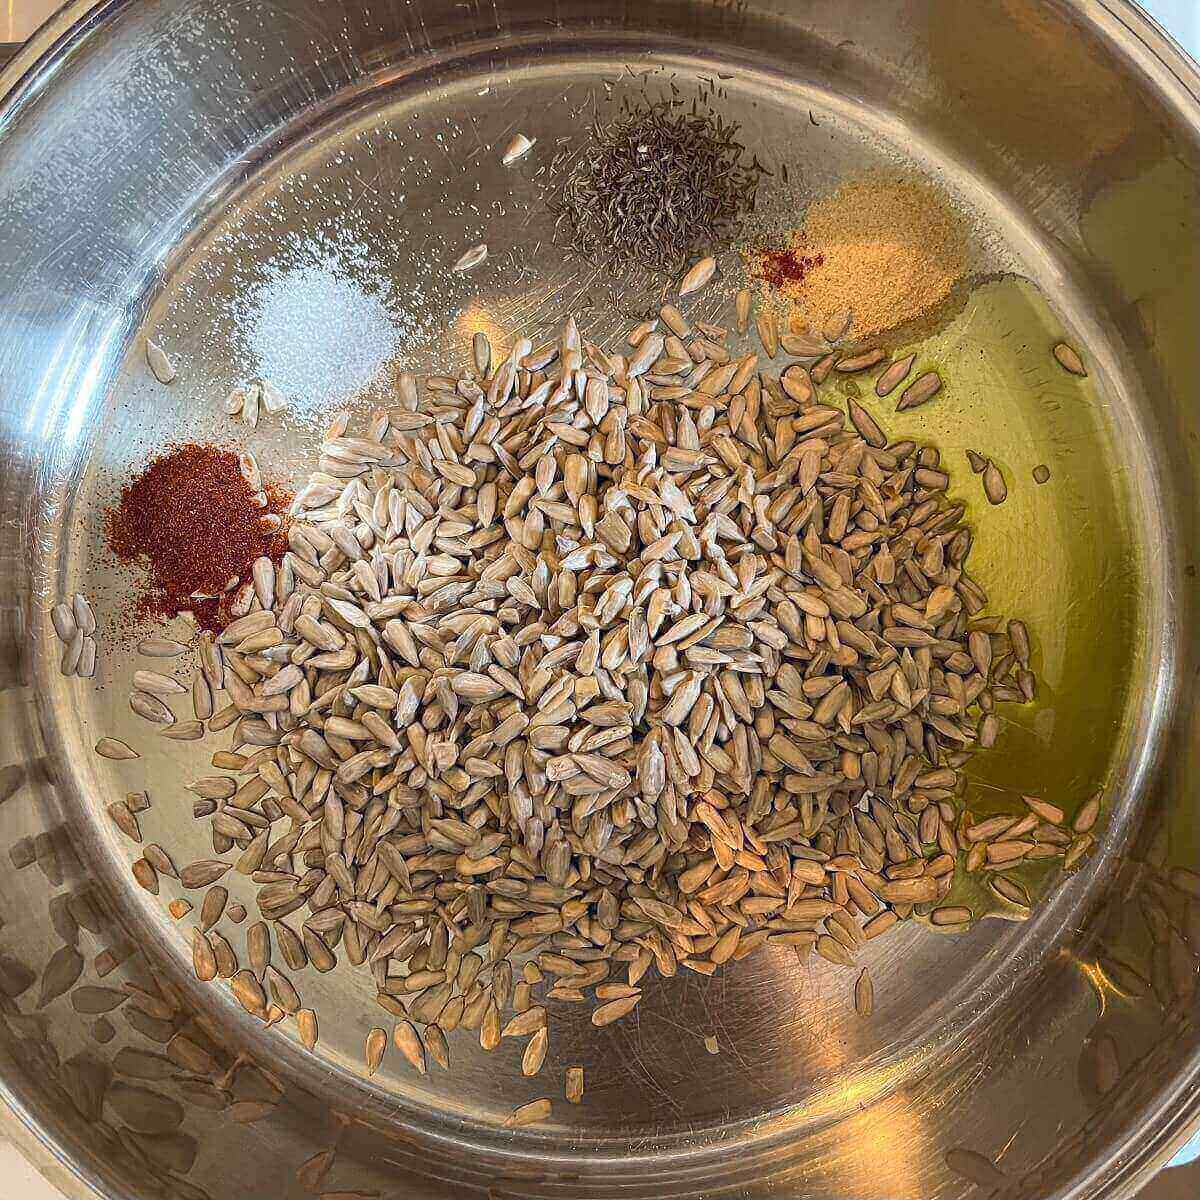 Sunflower seeds, oil, and spices in a metal pan.